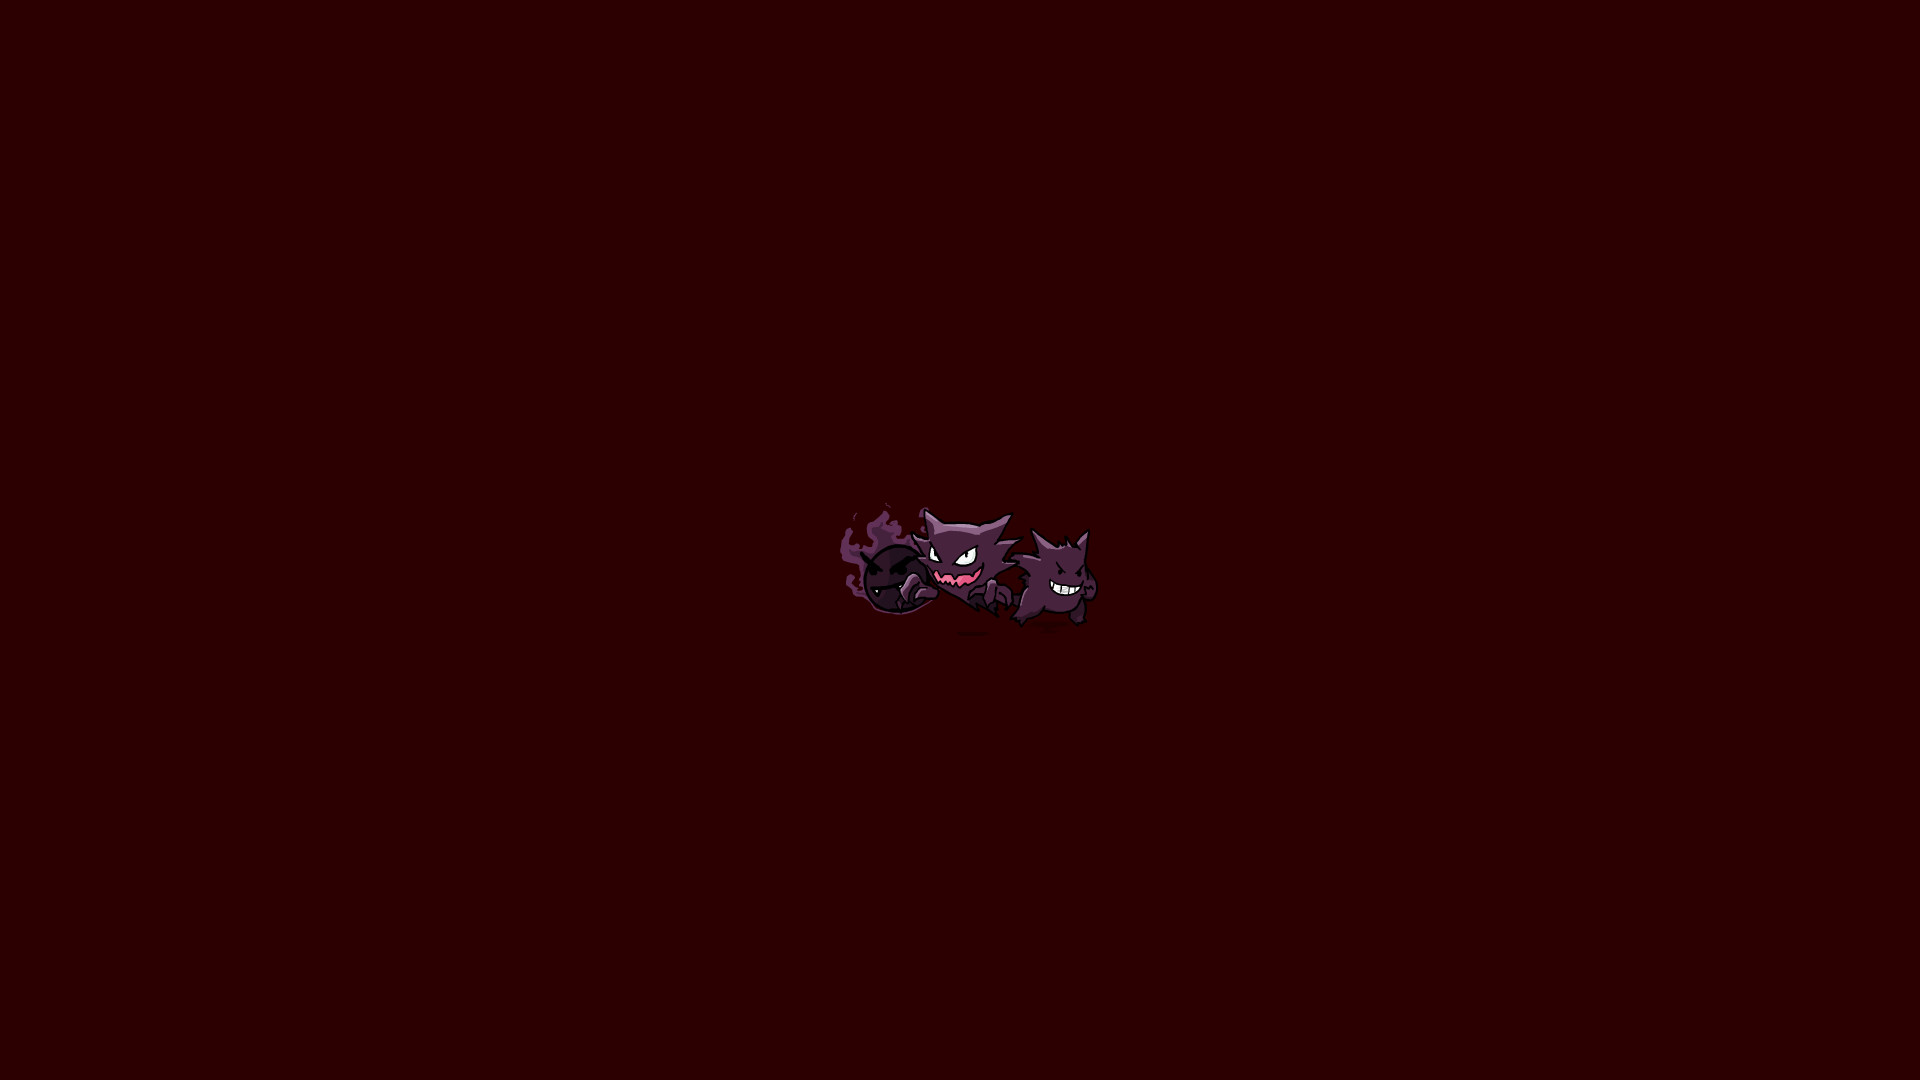 Limited Edition Cheap Daily T Shirts  Gengar Wallpaper Iphone Hd PngGengar  Png  free transparent png images  pngaaacom